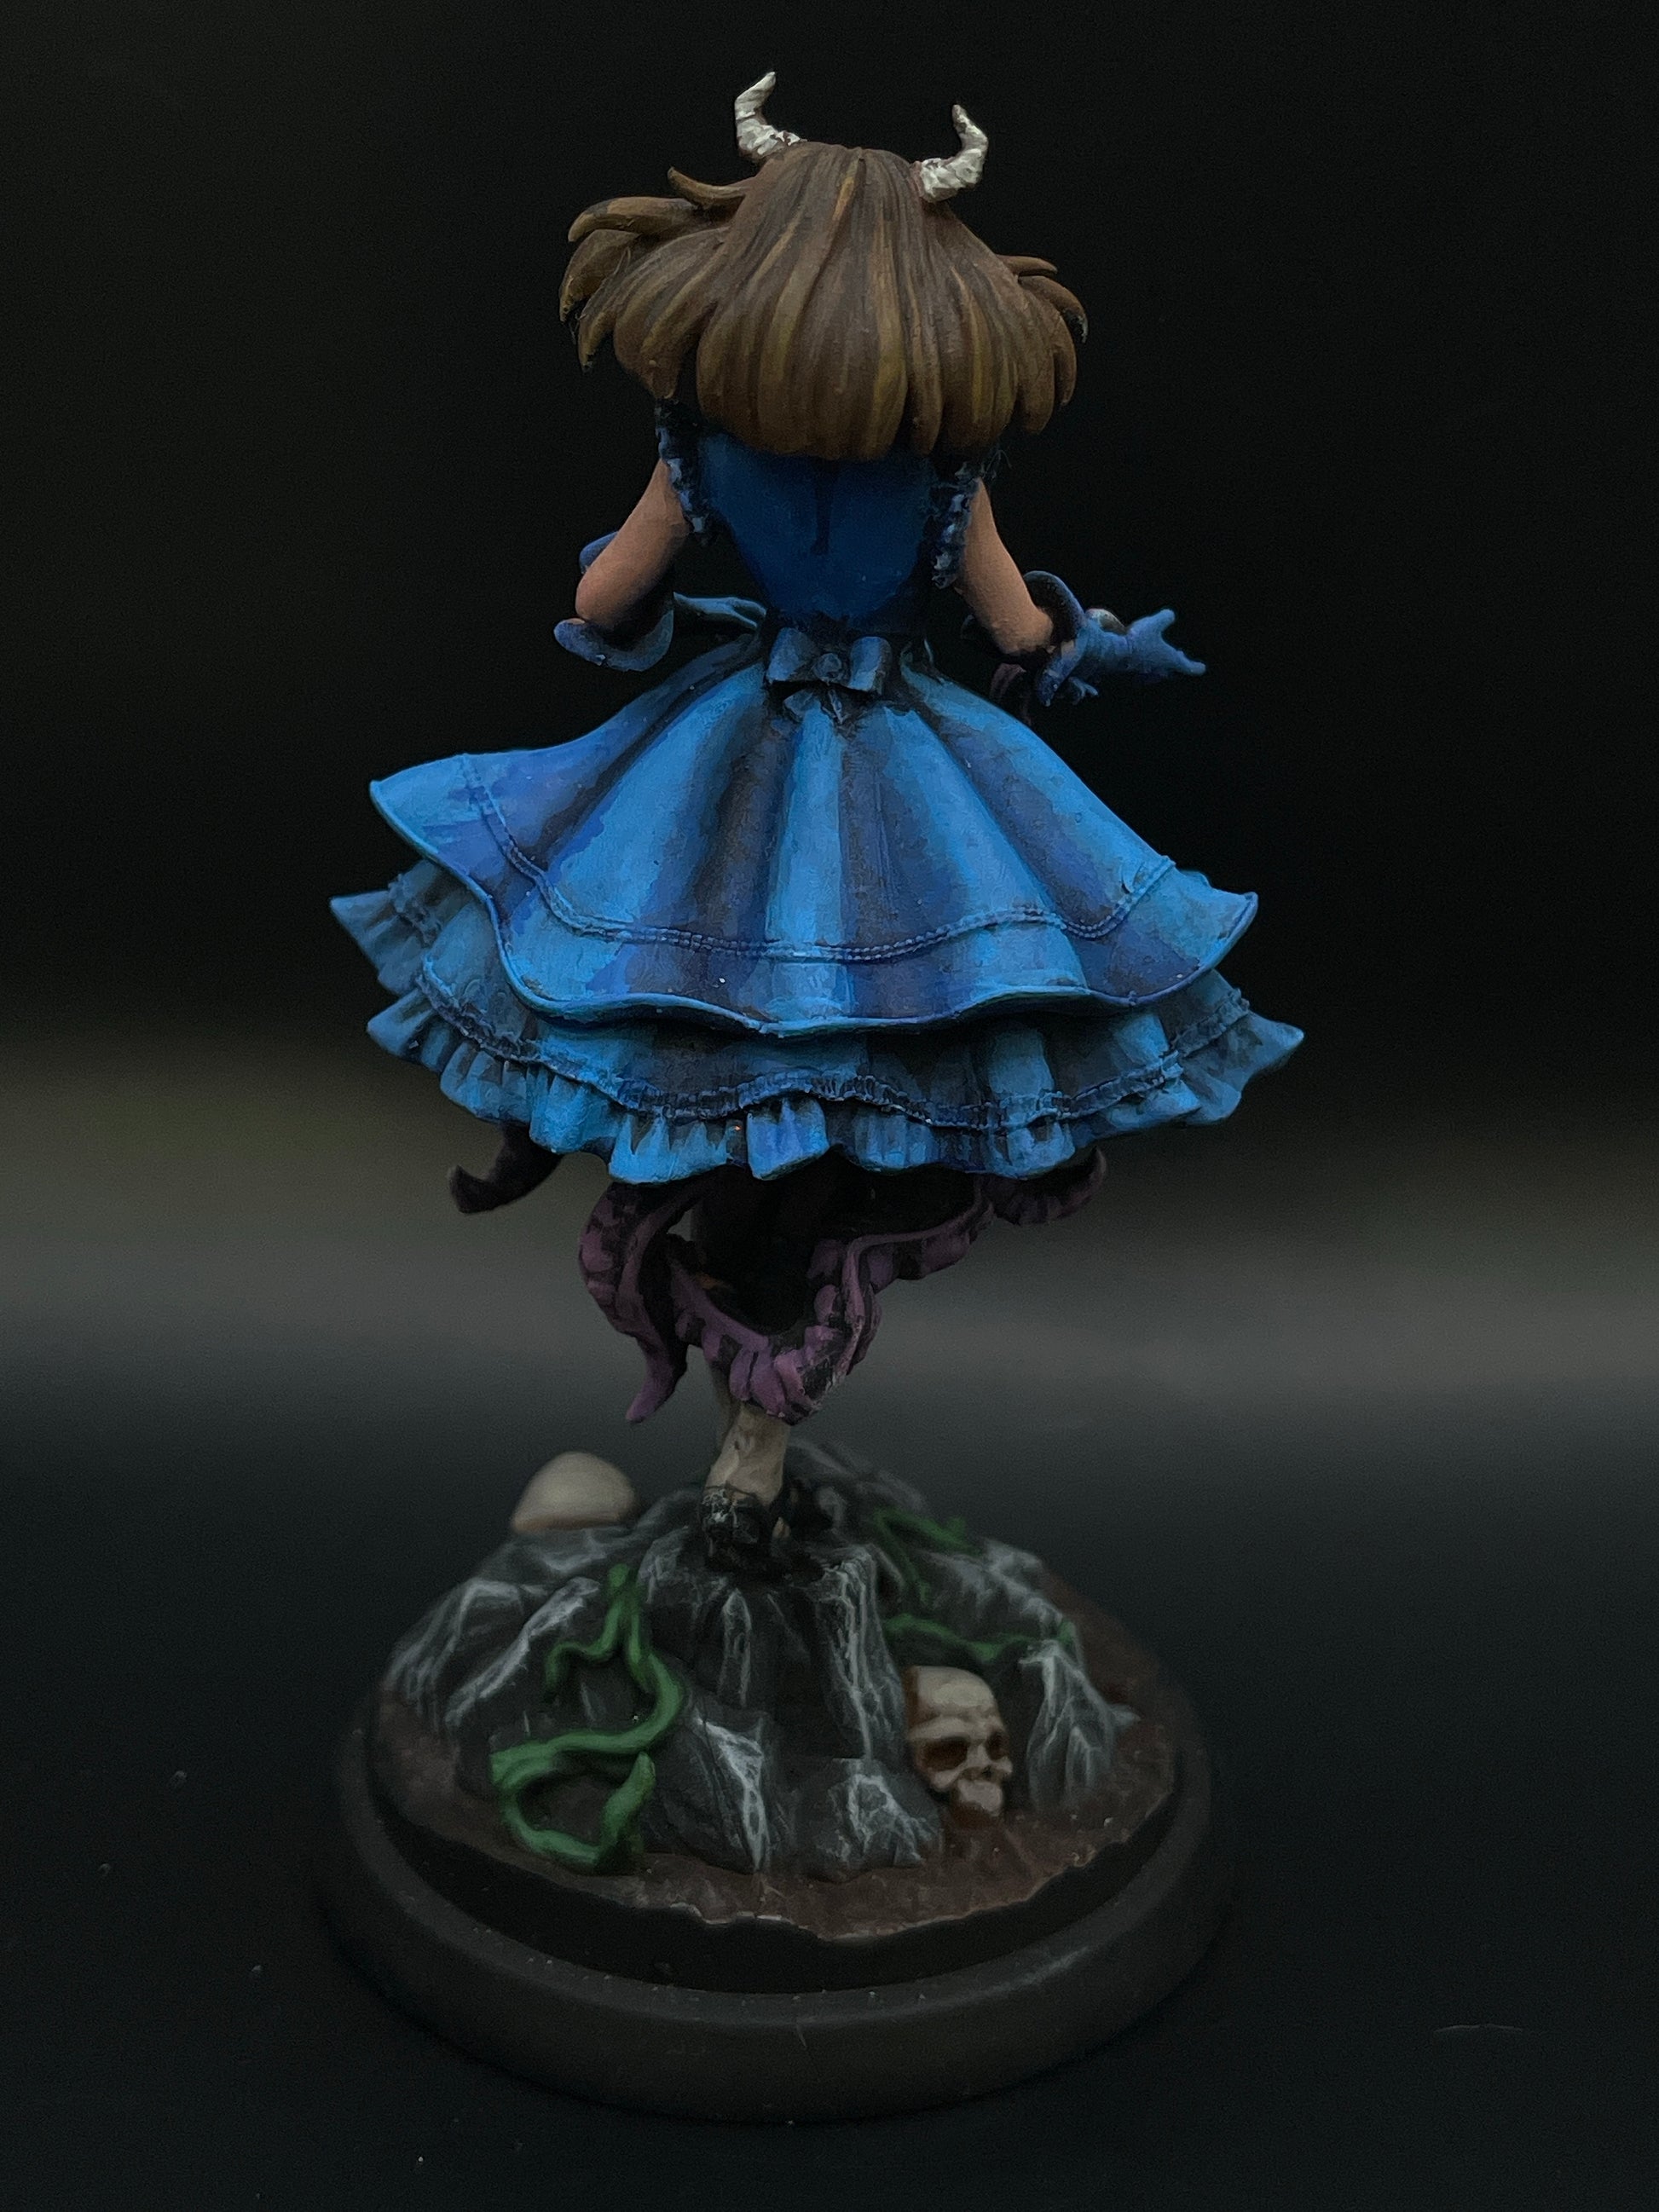 A 3D-printed miniature of Mary The Mimic Girl - Painted Miniature wearing a blue dress, brown gloves, and a headpiece with small horns stands on a rocky terrain base adorned with vines and skulls. The figure is facing away, showcasing the dress's flowing and layered design—perfect for any Dungeons and Dragons campaign.